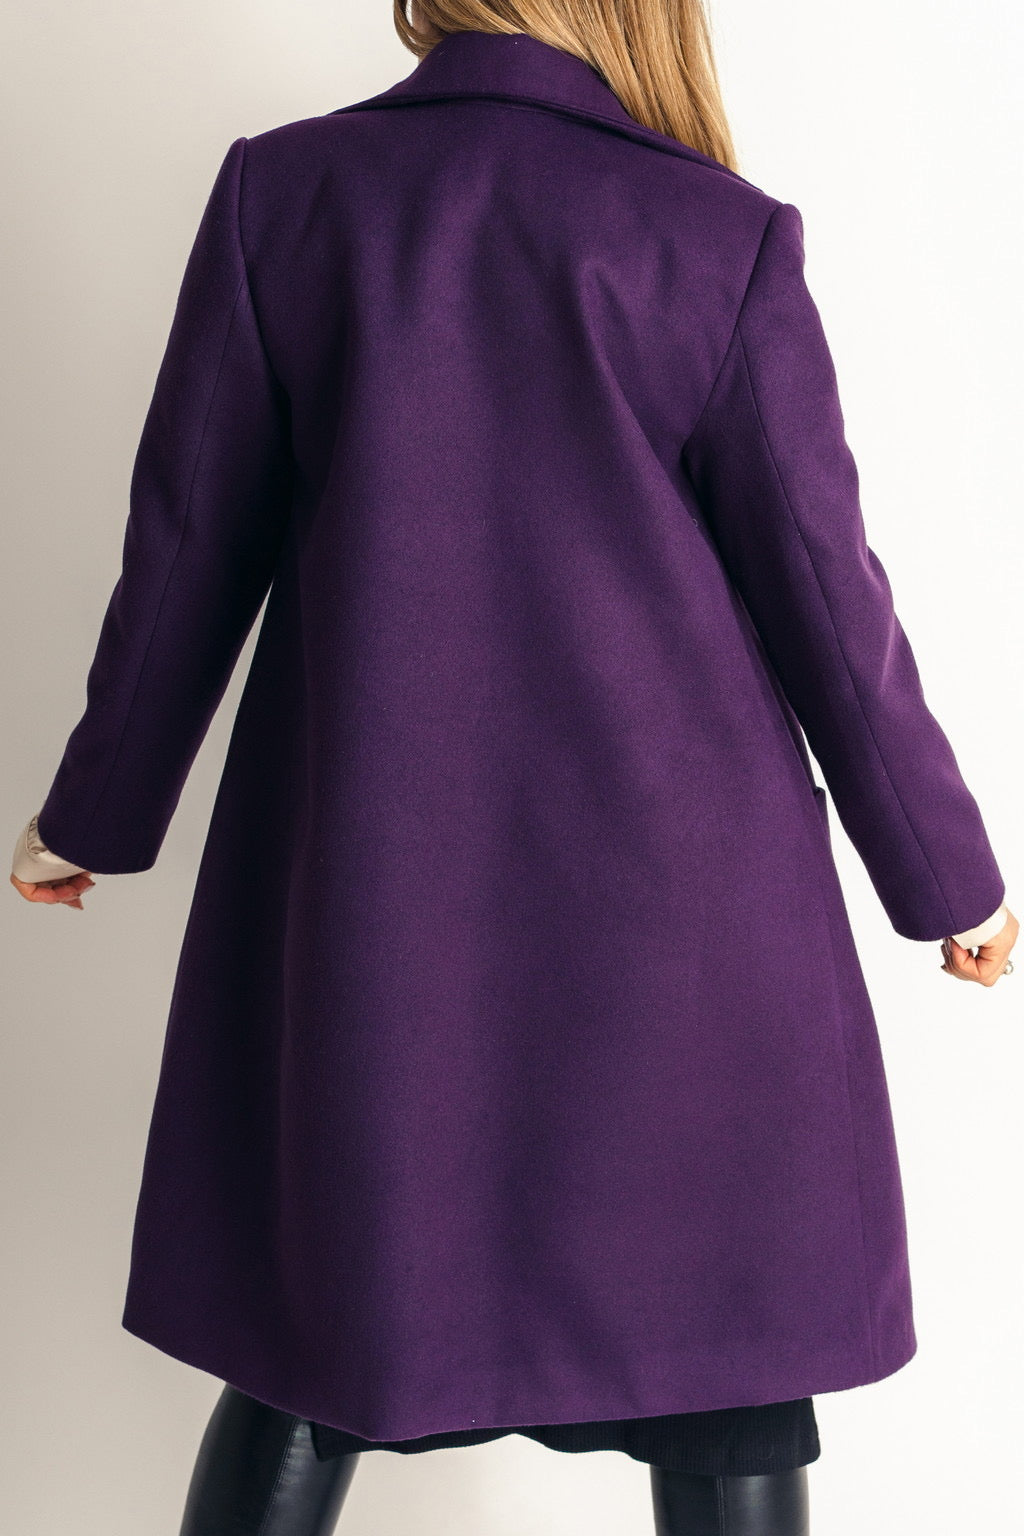 Products Spring Coat Light Wool Patch Pockets Coat In Deep Purple - back zoomed